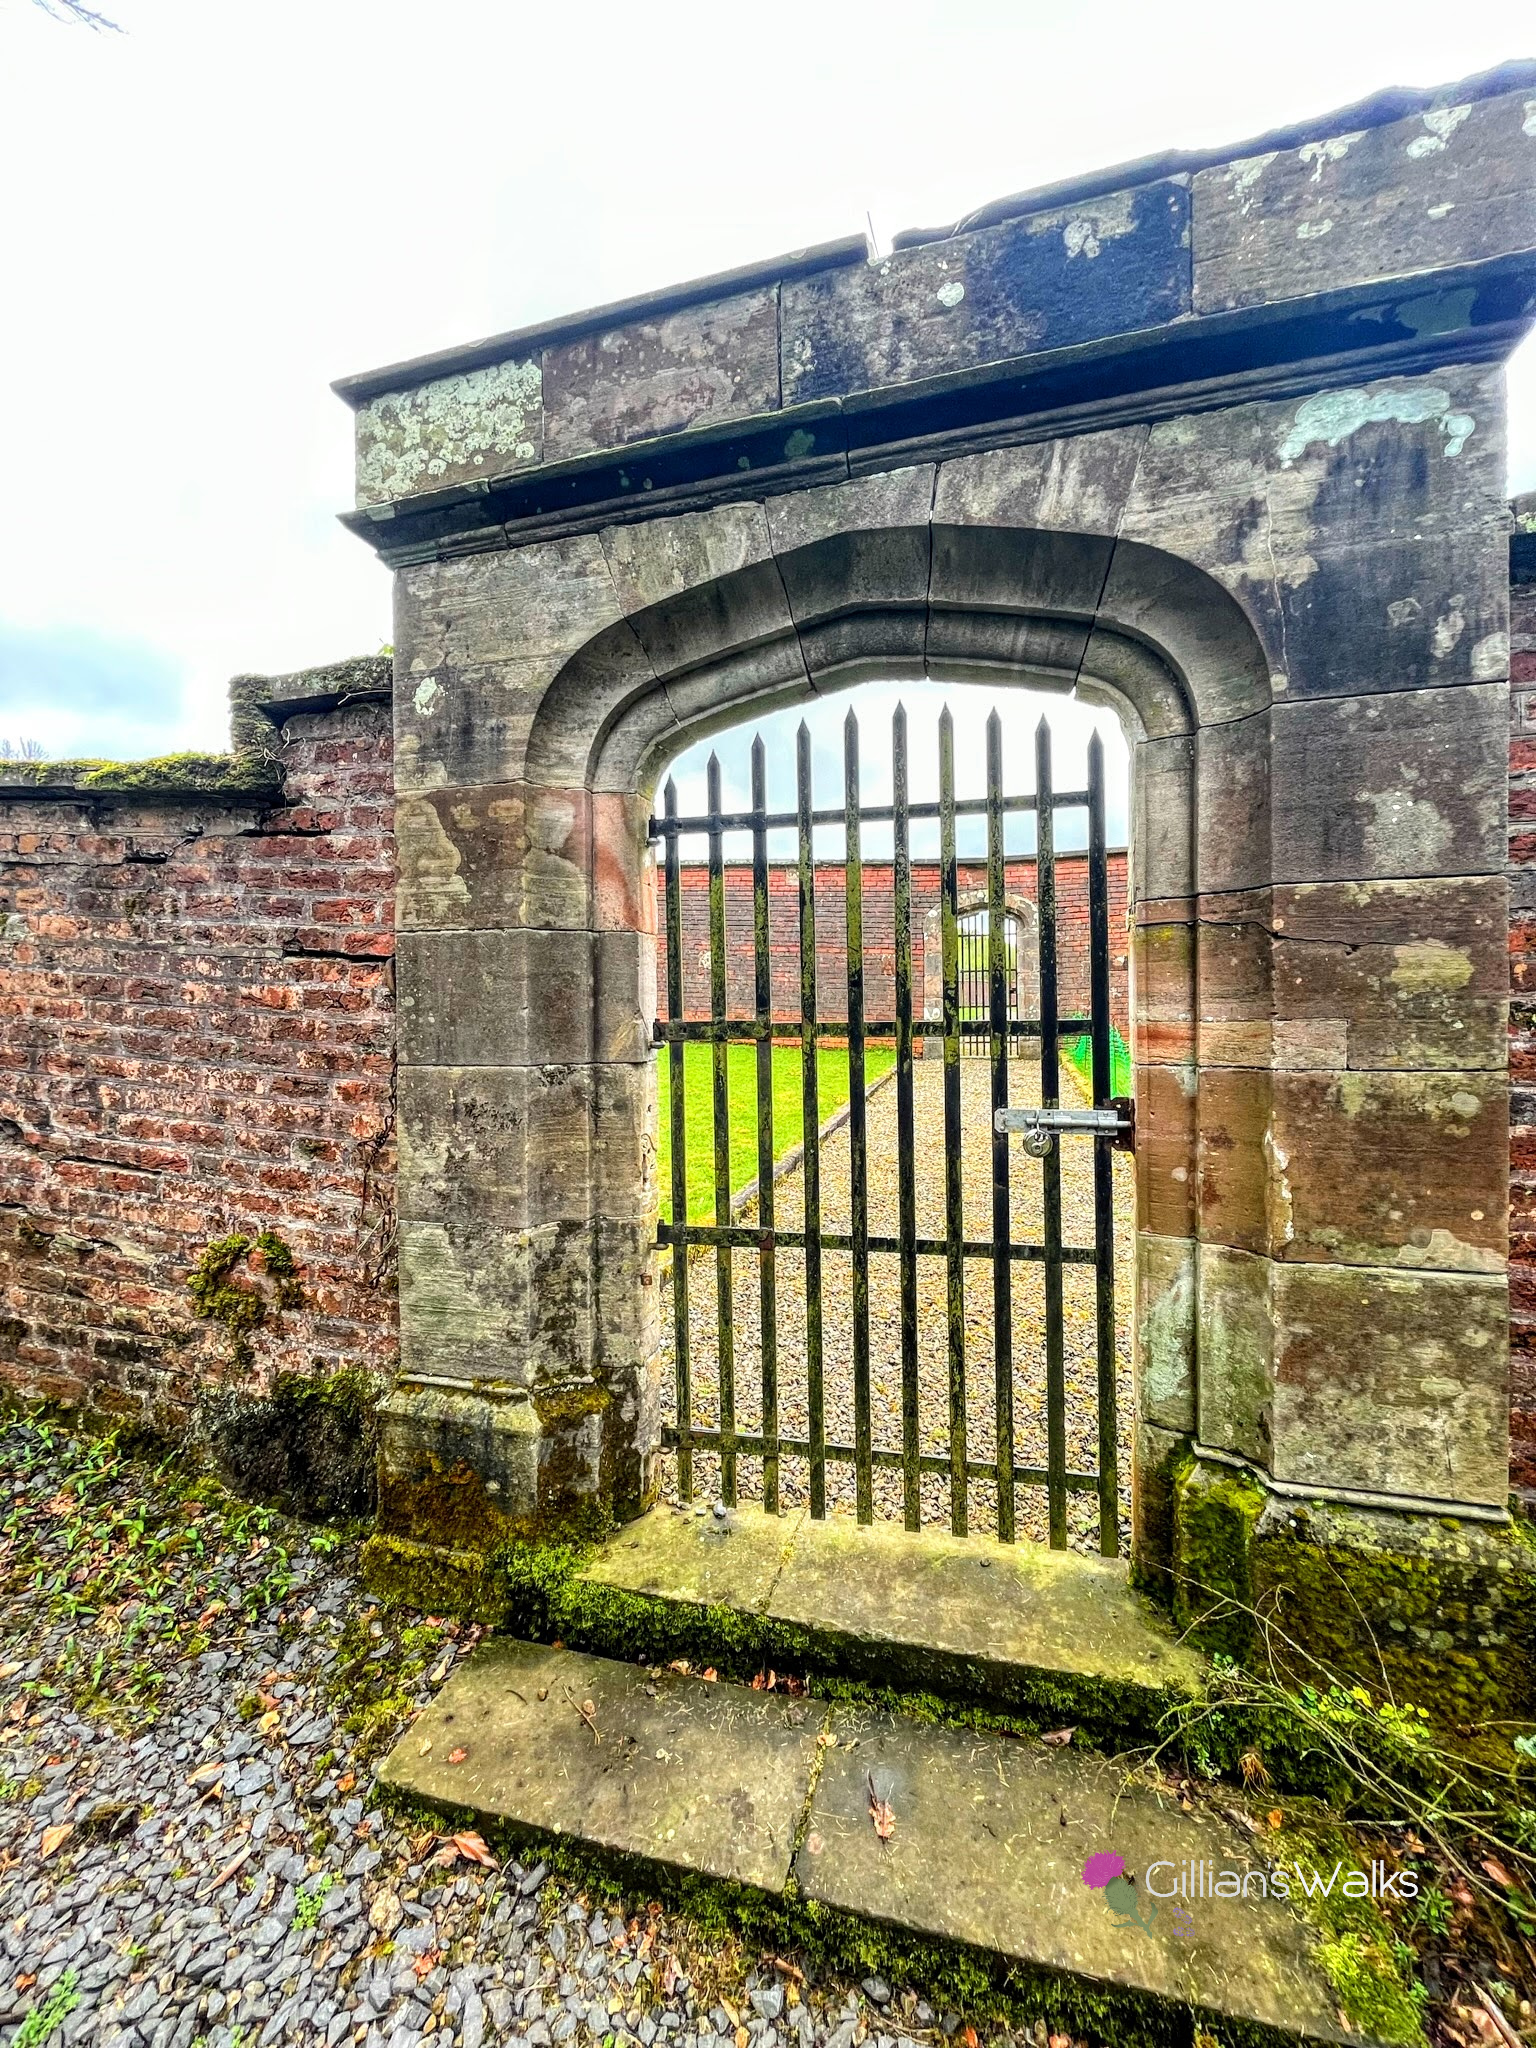 Gated entrance to walled garden, with visibility behind the gate into the garden itself